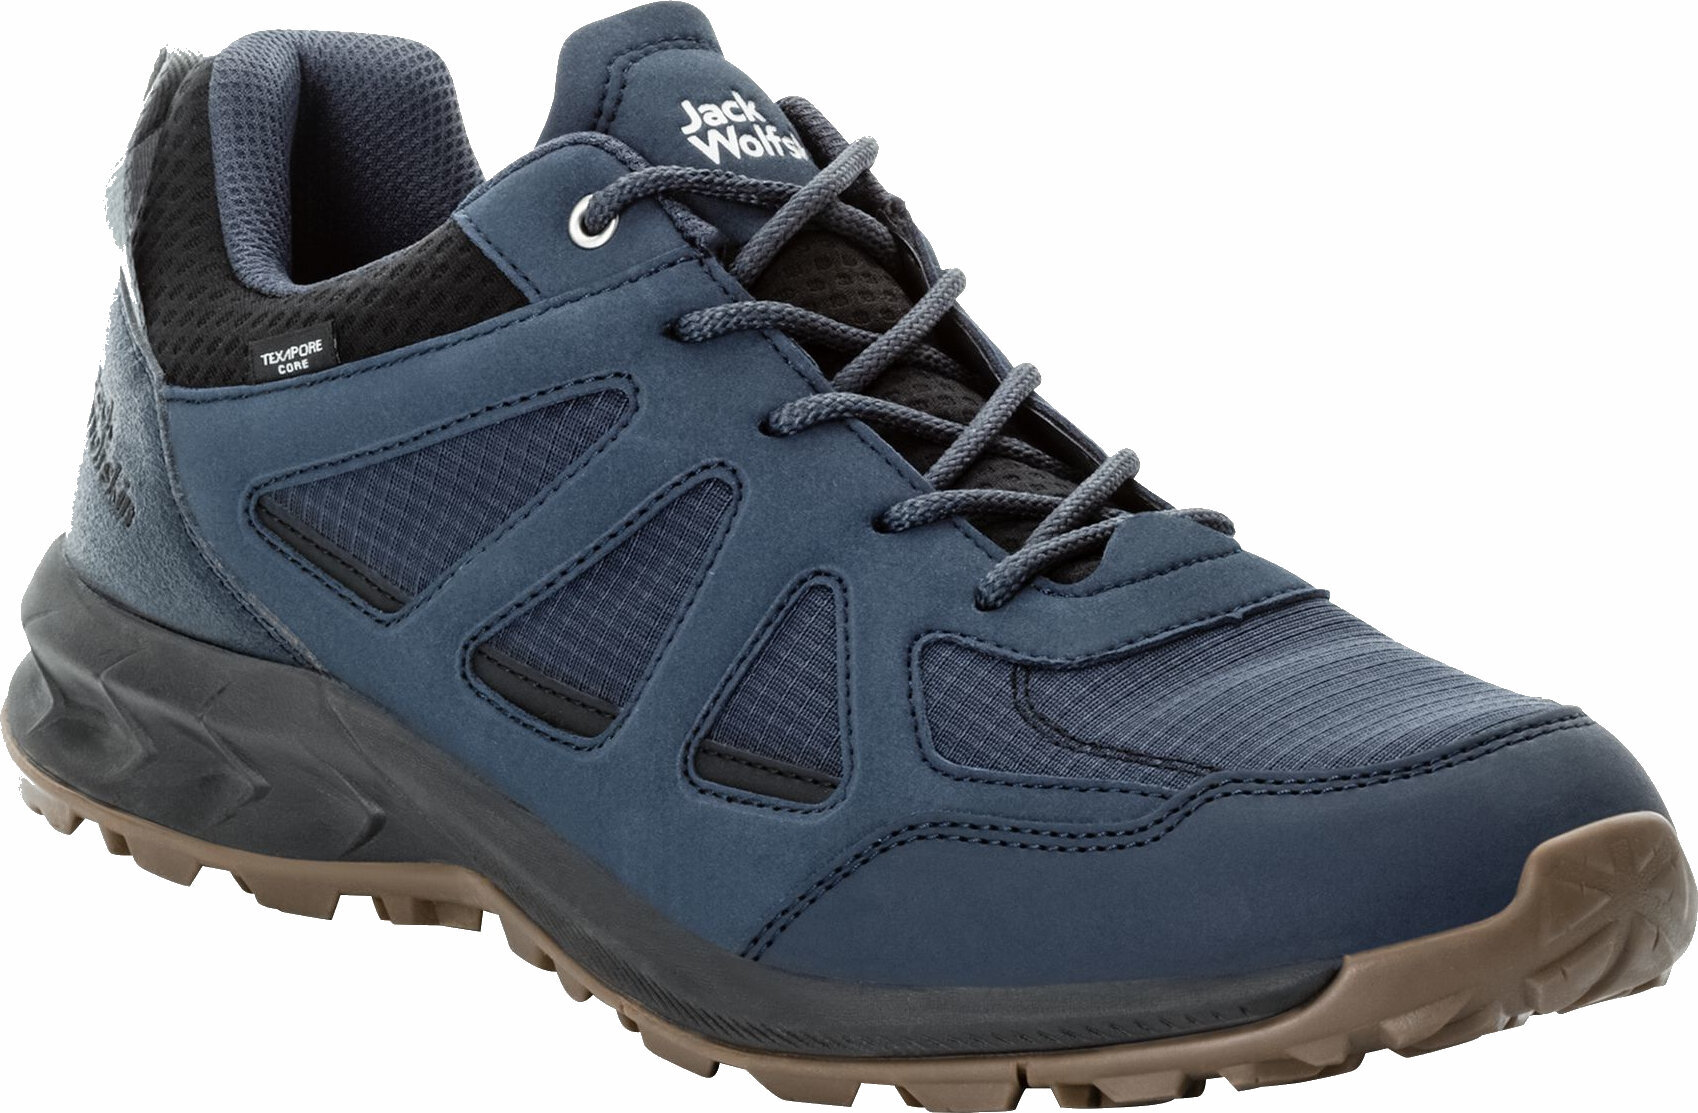 Chaussures outdoor hommes Jack Wolfskin Woodland 2 Texapore Low M Night Blue 42,5 Chaussures outdoor hommes